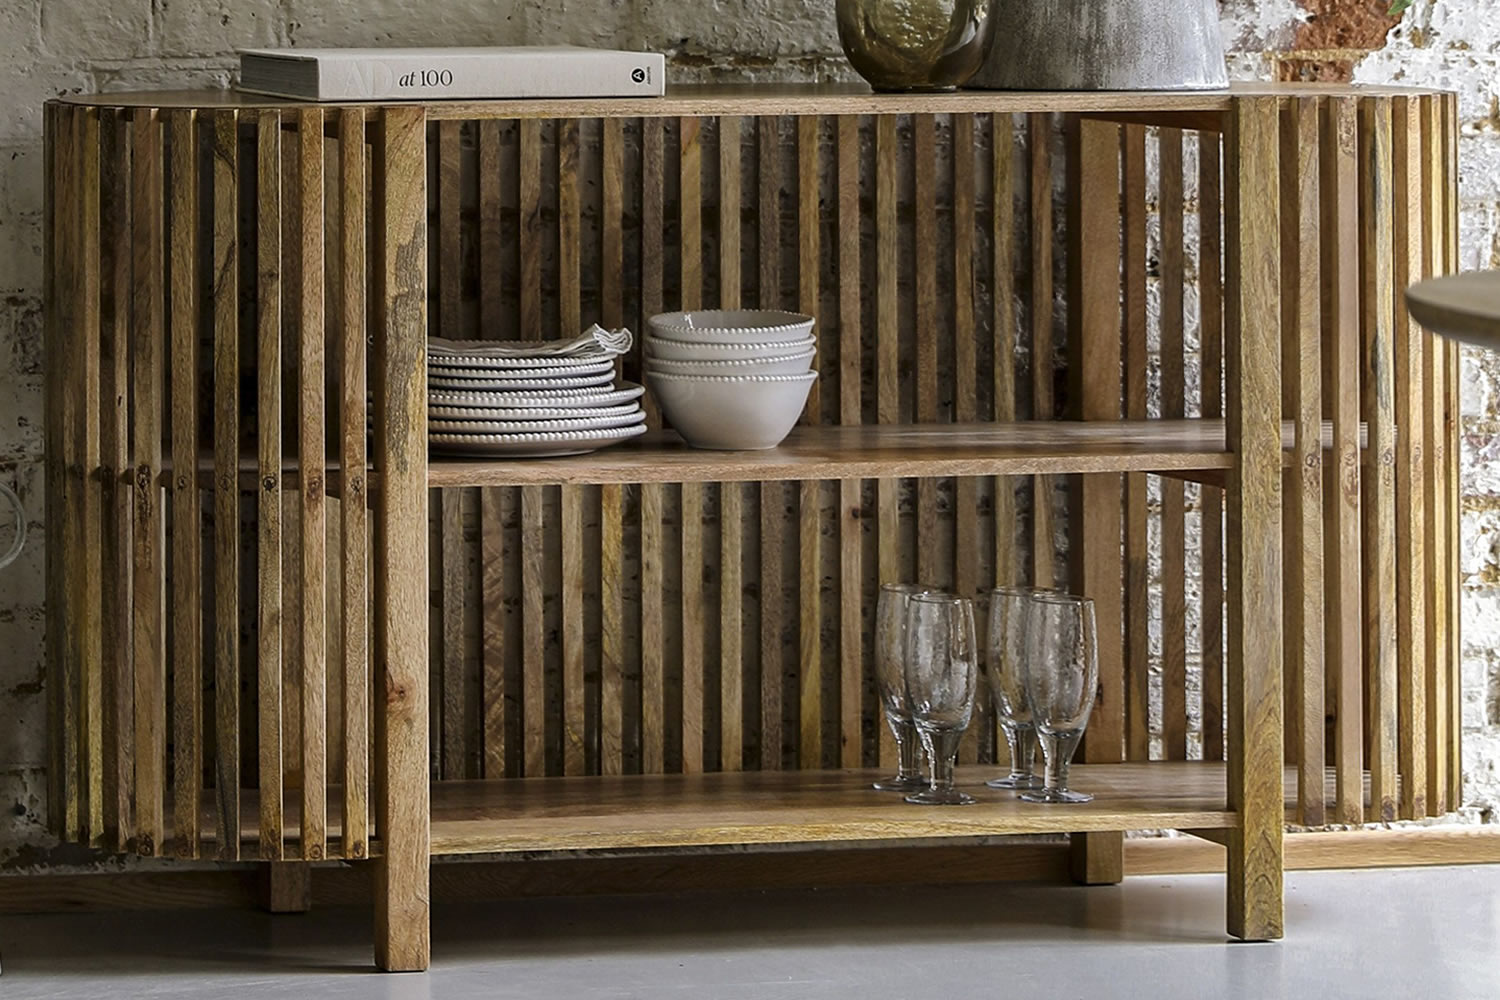 View Voss Unique Slatted Console Table Crafted From Mango Acacia Wood With Natural Grain Finish Two Handy Storage Shelves Matching Pieces Available information